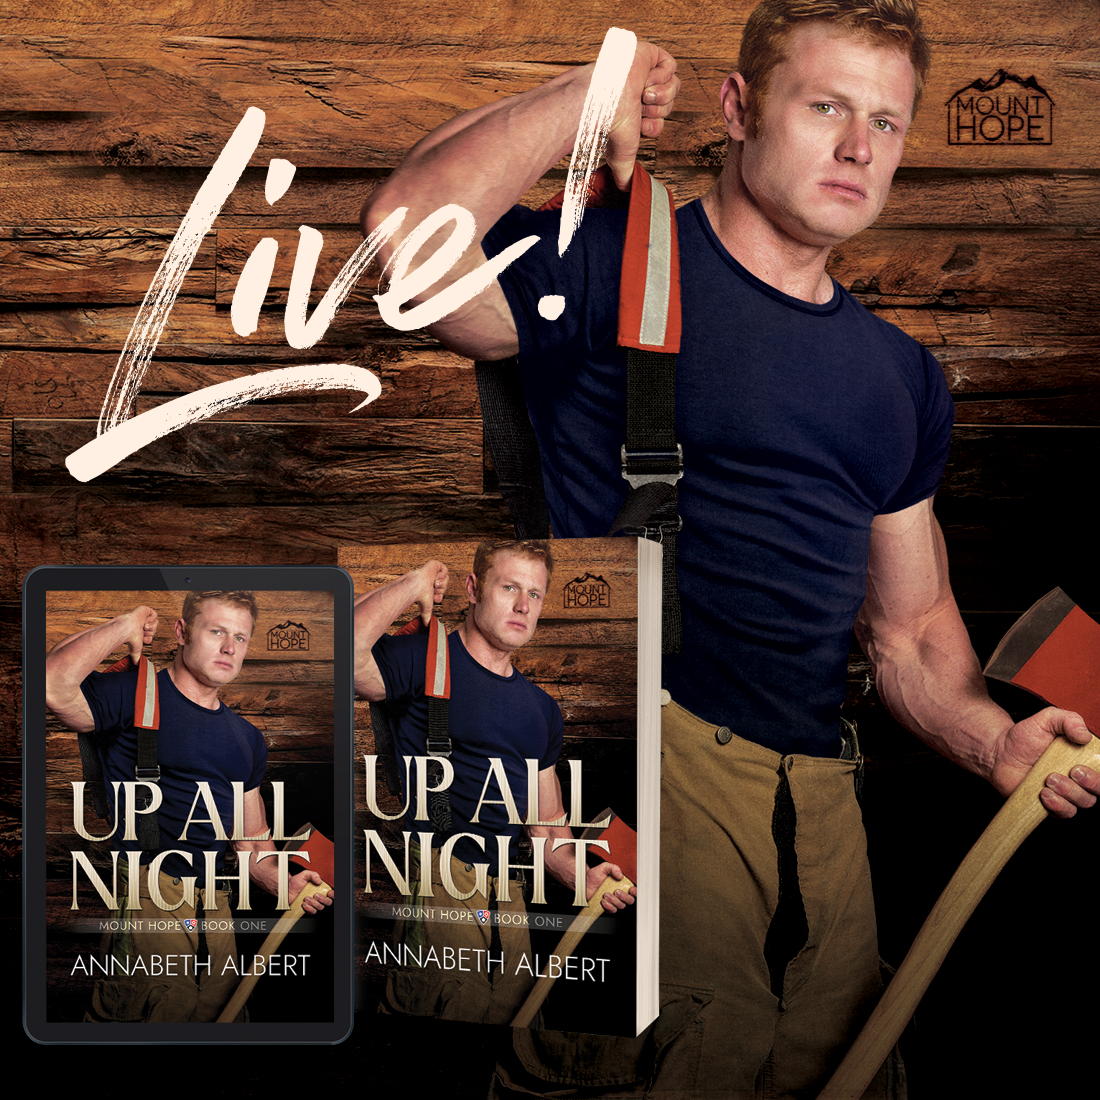 Ready for a new Annabeth series? UP ALL NIGHT is live now & launches my new first responder series, Mount Hope! Firefighter + all-night diner chef! Get yours: readerlinks.com/l/3840099